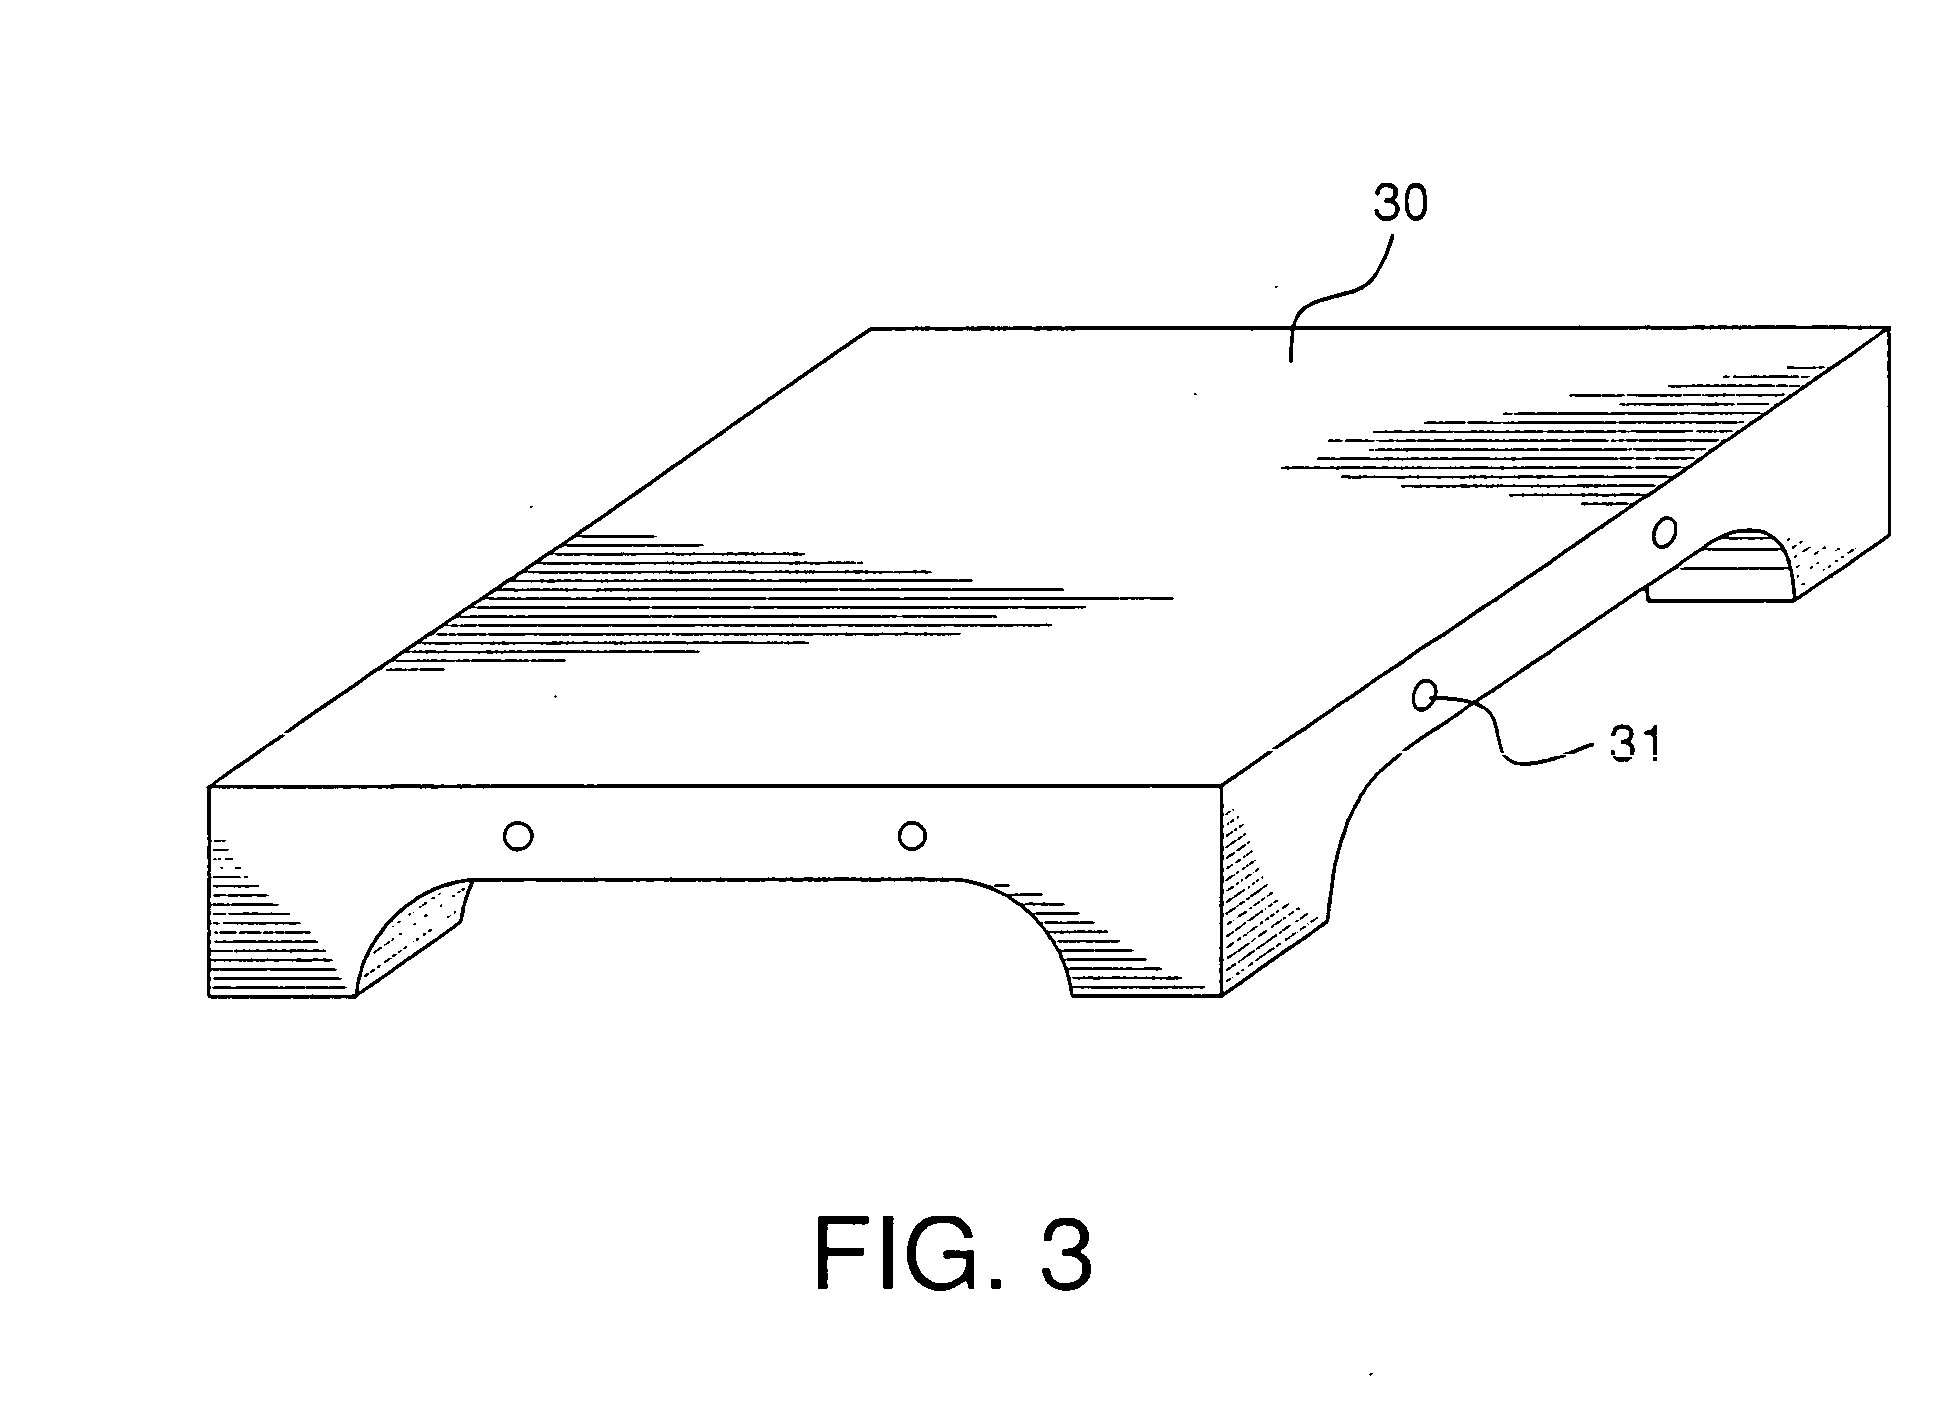 Thermoplastic composite building material and method of making same